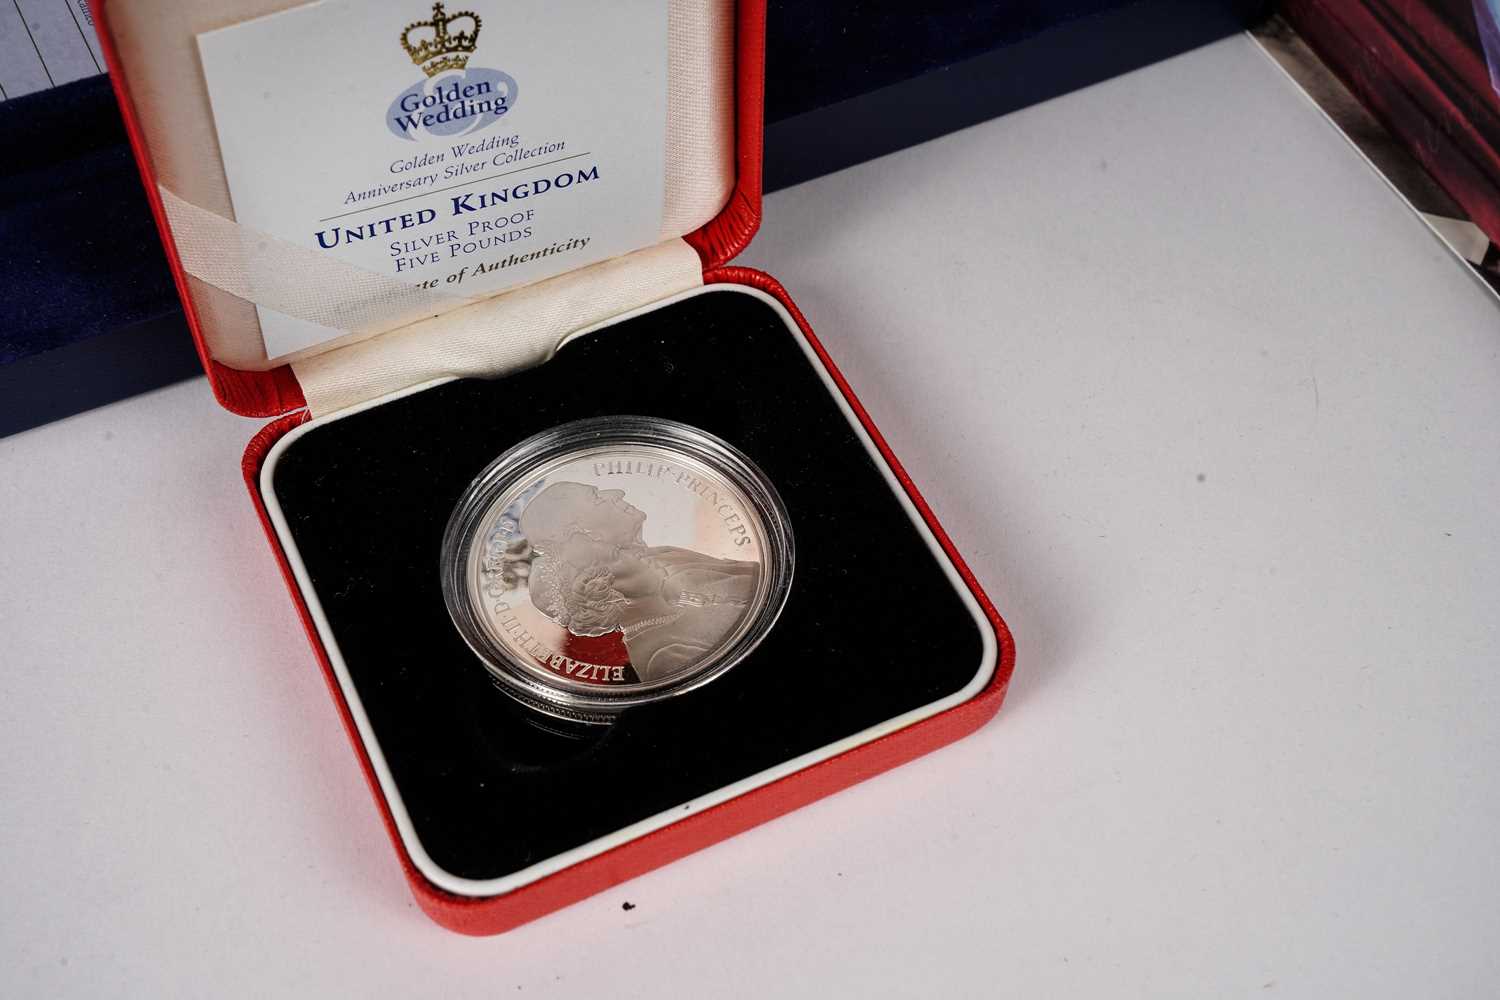 The Royal Mint Westminster Queen Elizabeth II The Golden Wedding Anniversary coin collection - Image 8 of 8